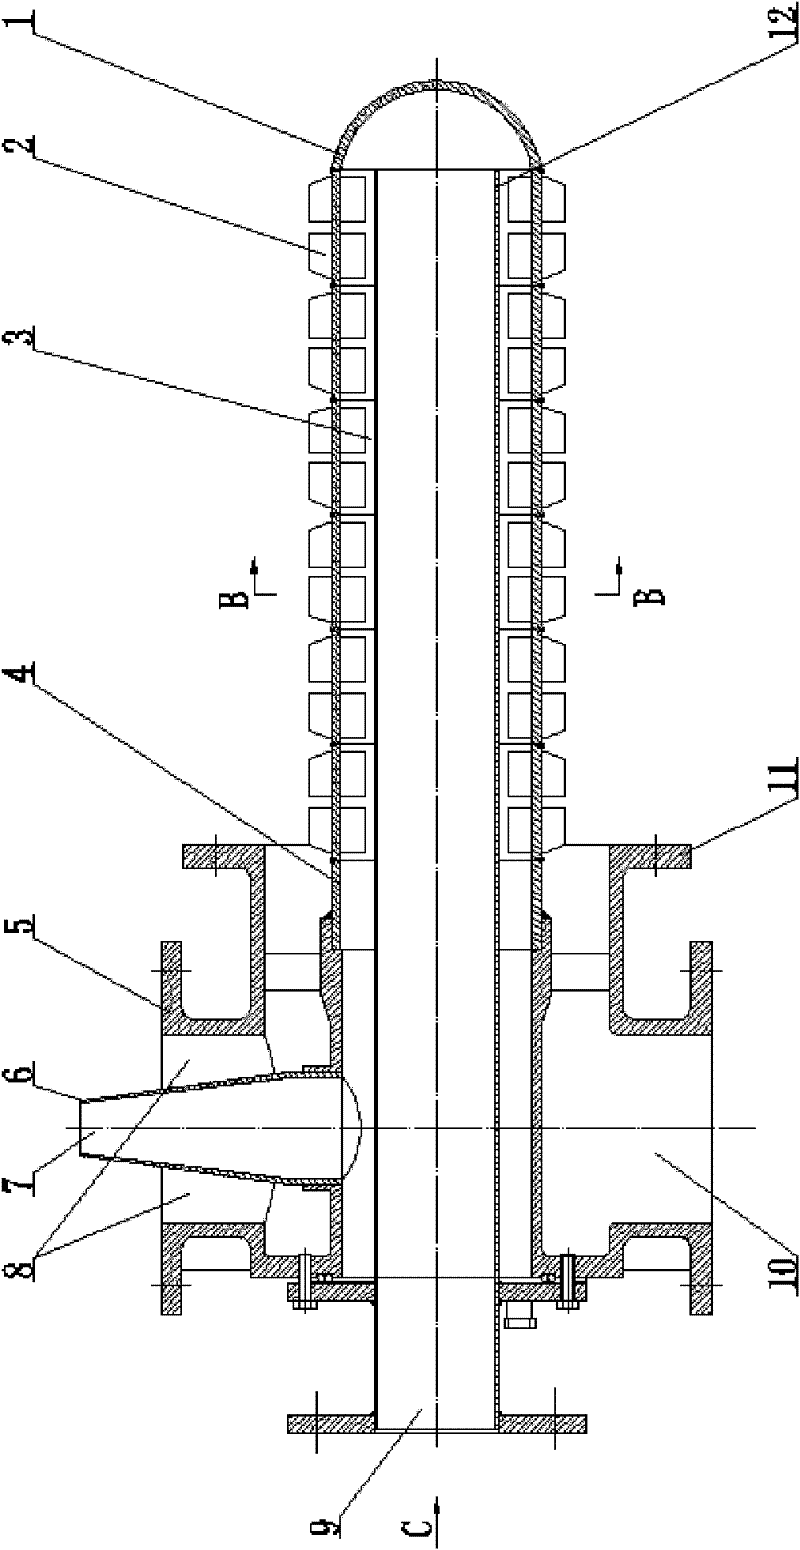 Air injecting and backflow flue gas entraining heat exchanger for radiant tube combustion device